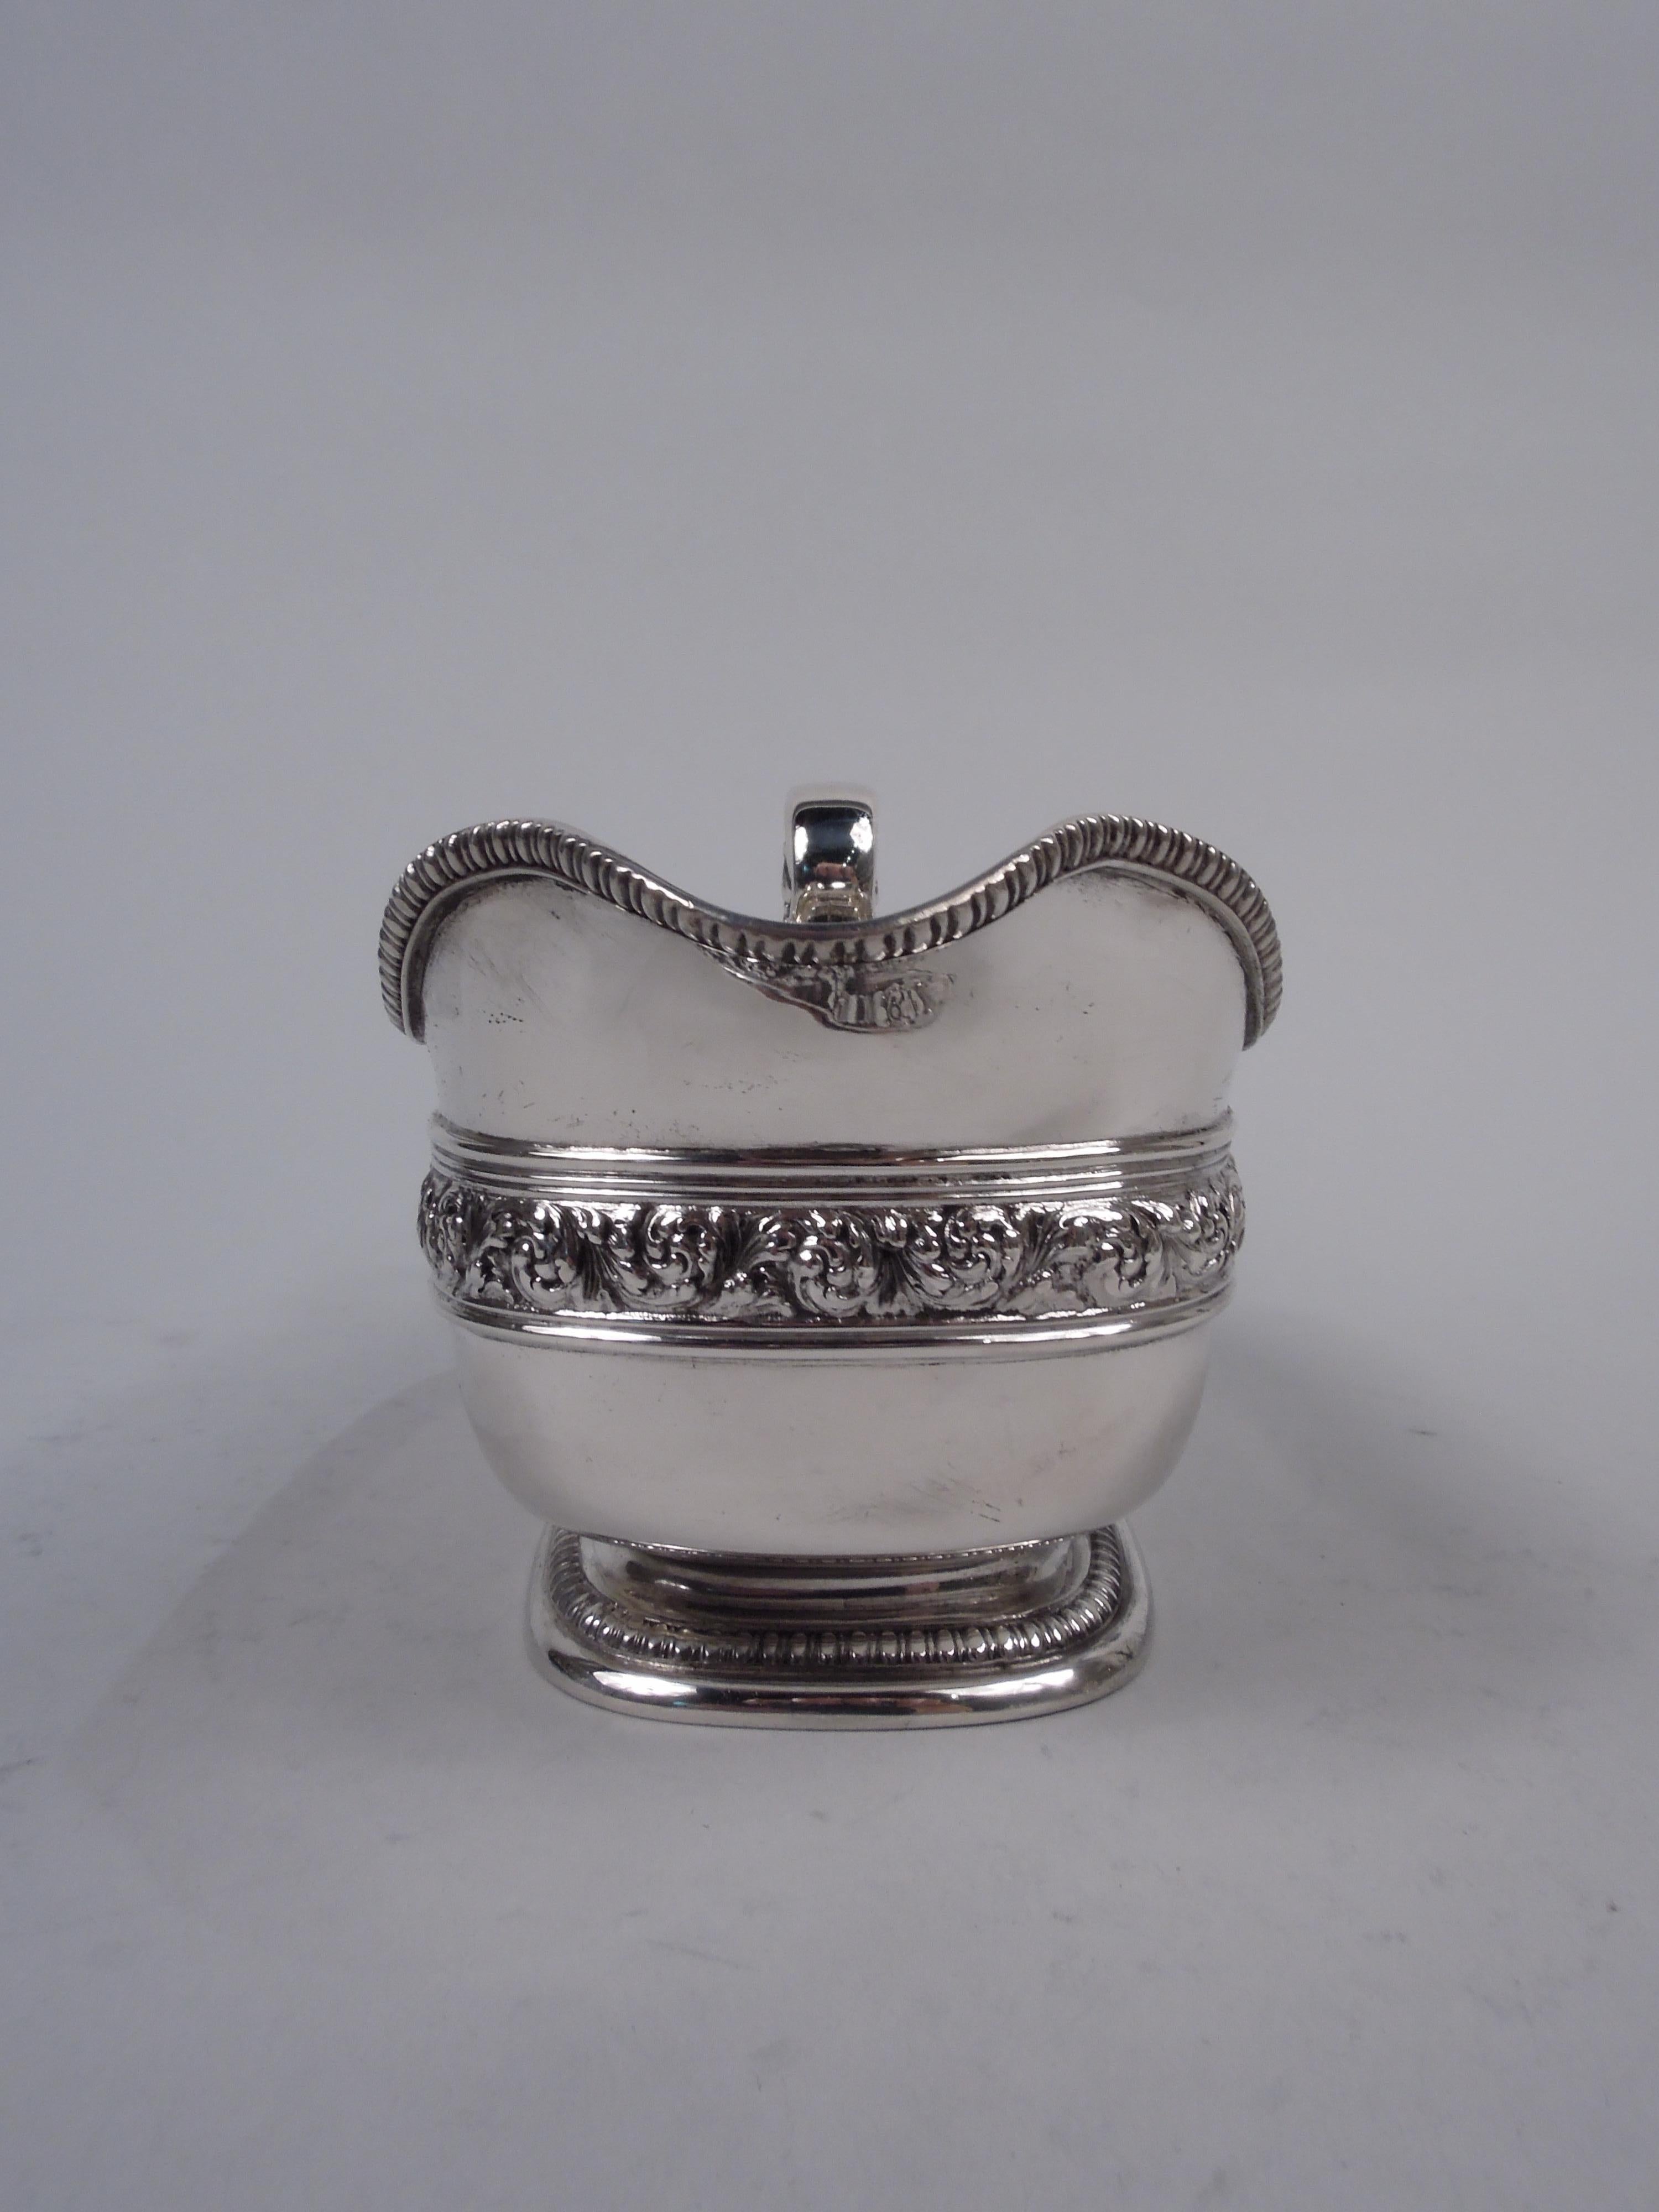 Repoussé Pair of Antique Tiffany Victorian Classical Sterling Silver Sauceboats For Sale